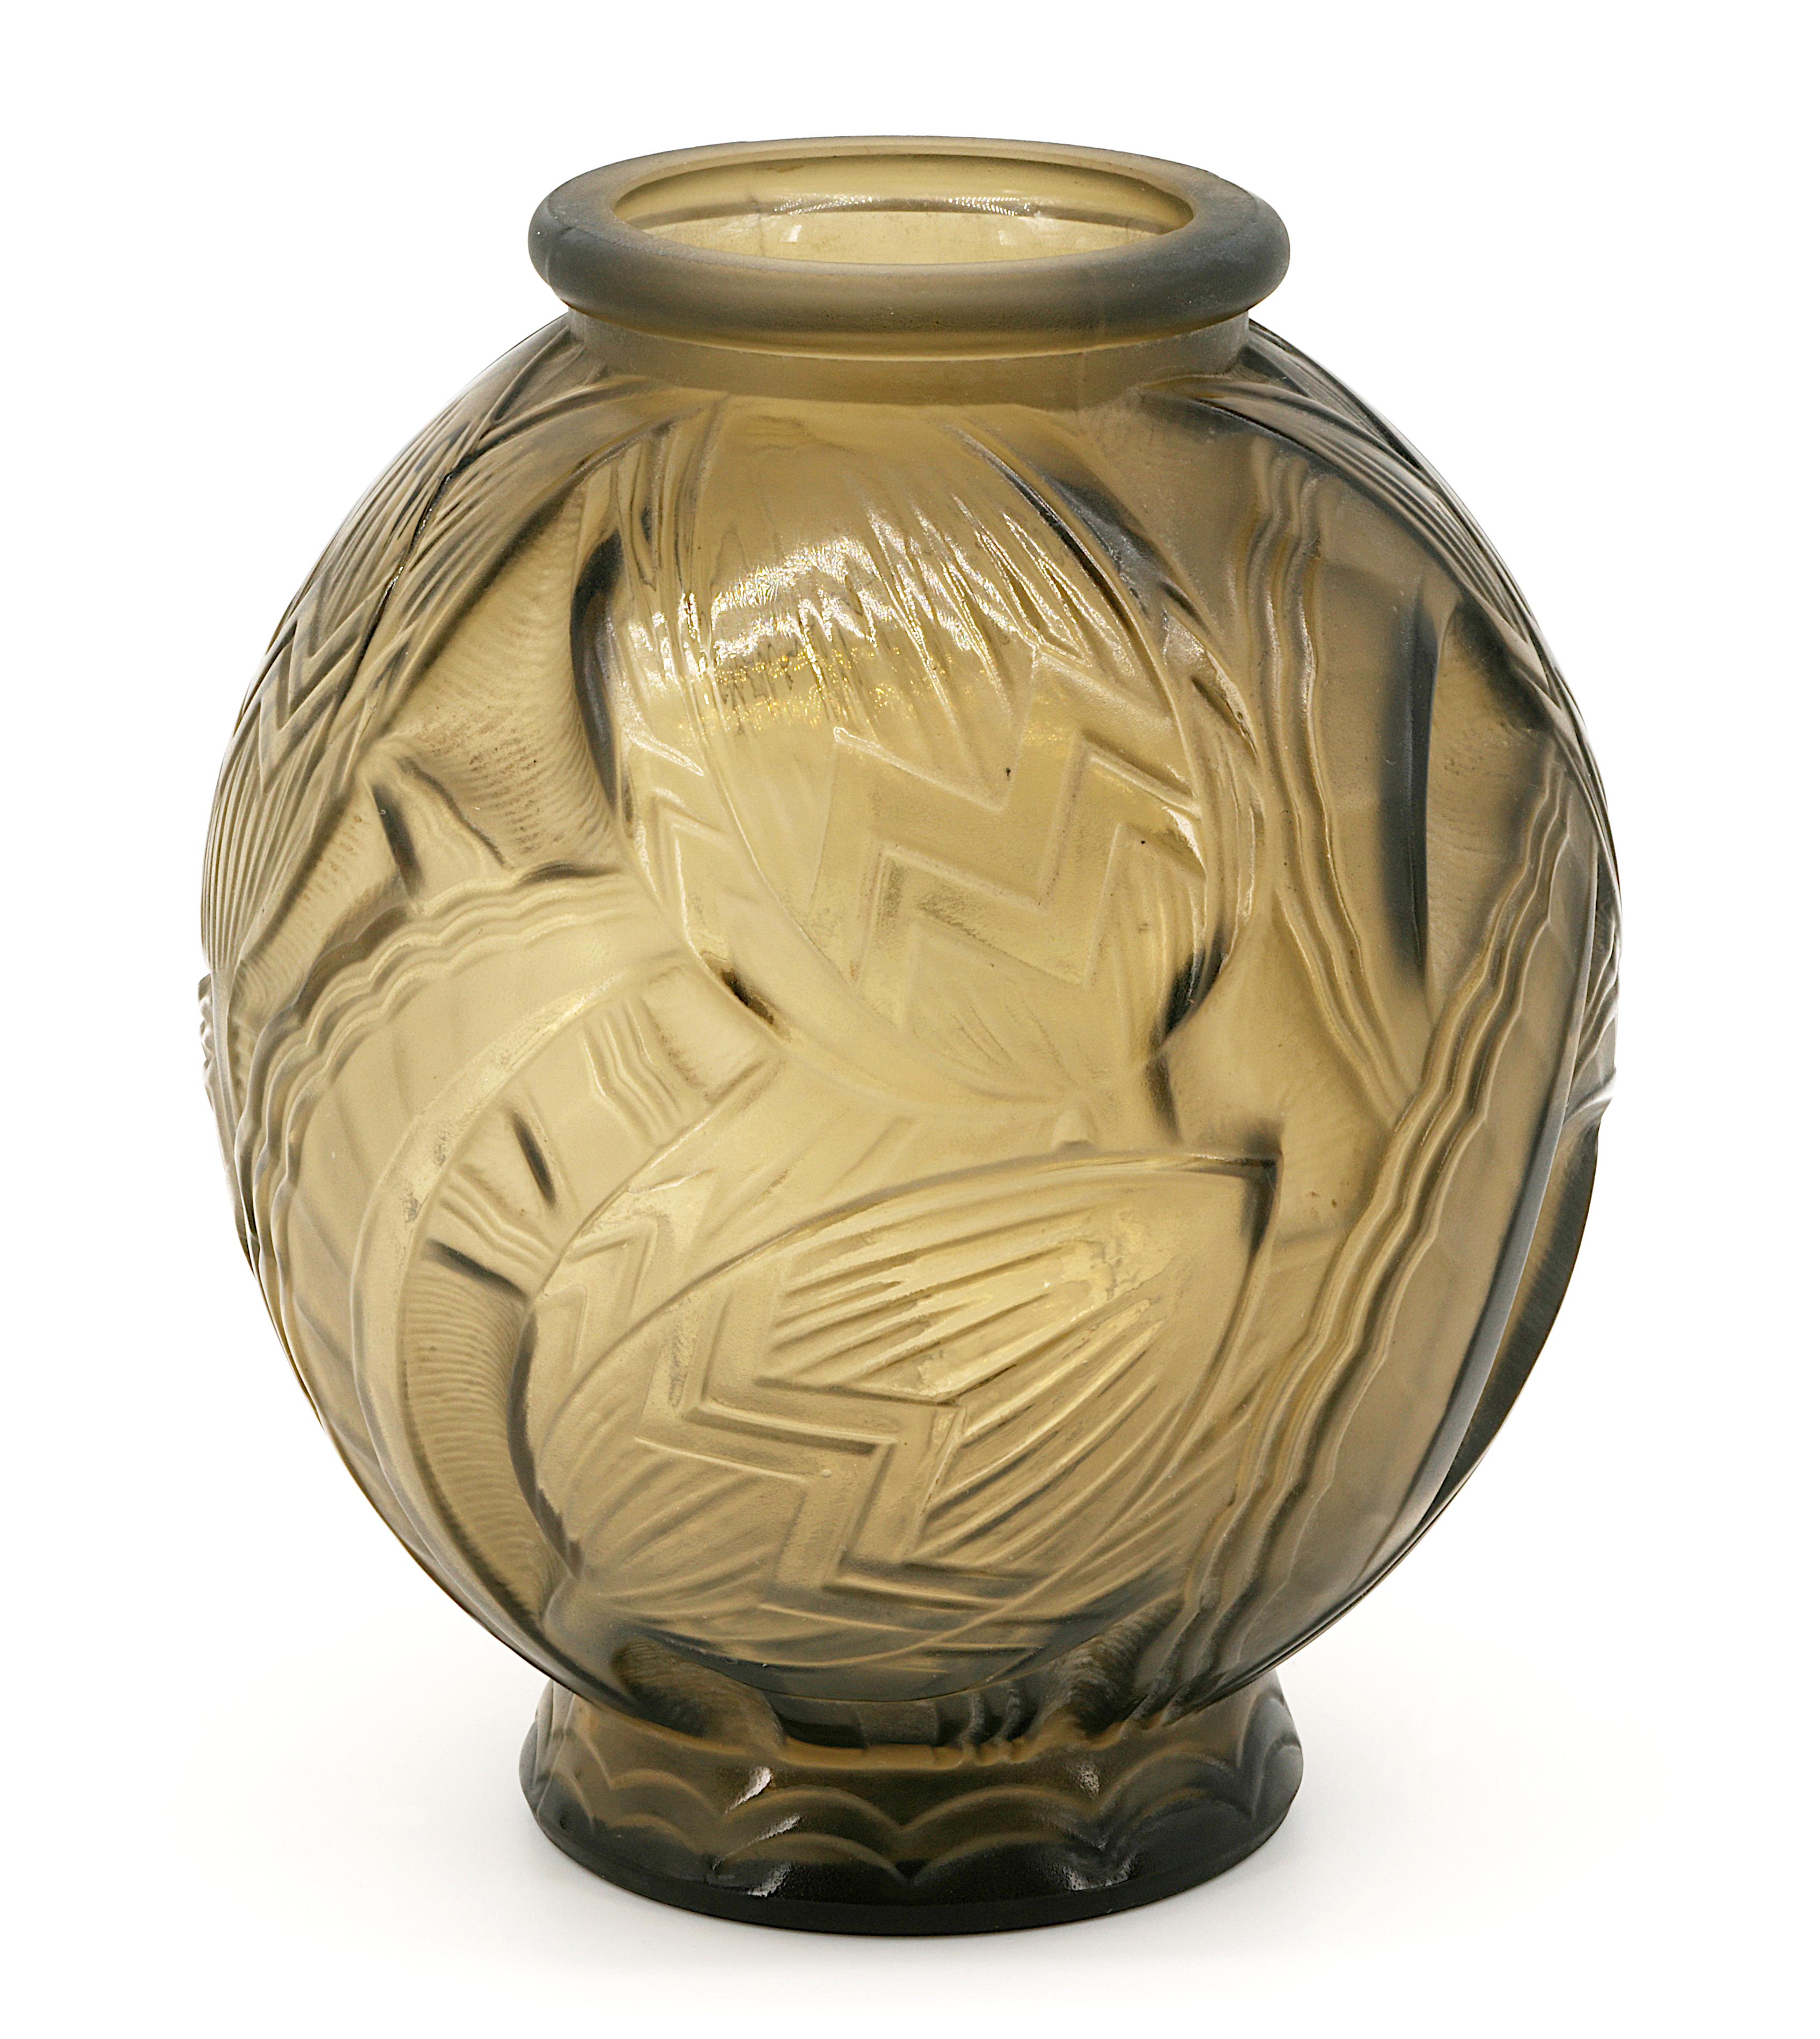 French Art Deco vase by PIERRE D'AVESN, France, 1926-1930. Frosted molded glass with a flower pattern. Brown/green color. Purple reflects under the light. Height: 7.9